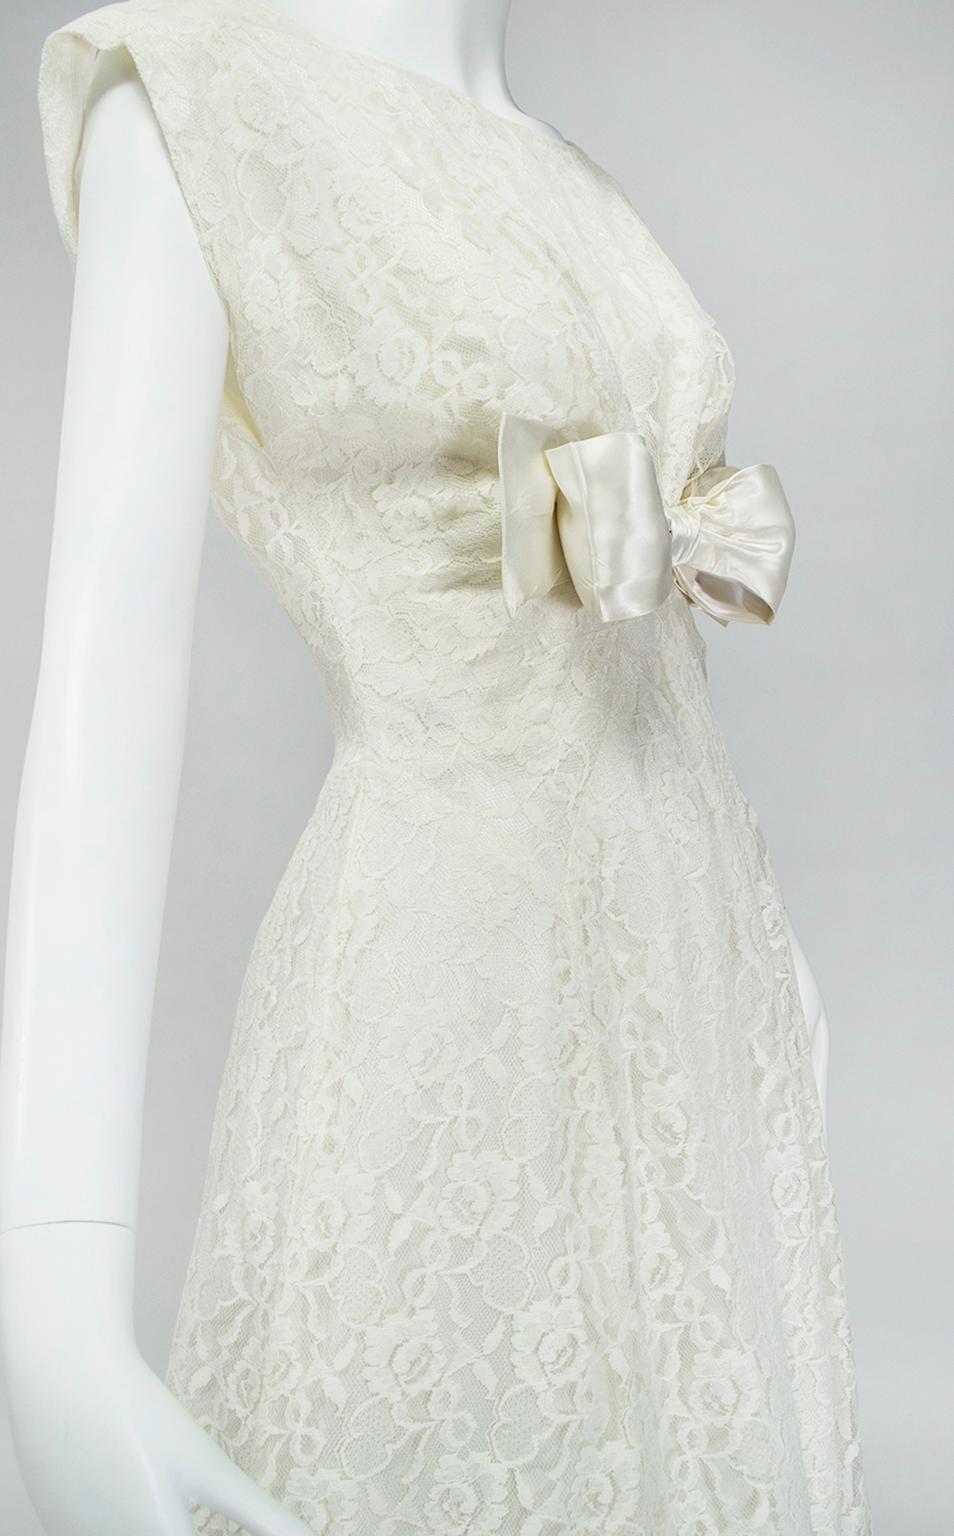 Gray Emma Domb Ivory Floor Length Bateau Neck Wedding Gown with Empire Bow - S, 1950s For Sale